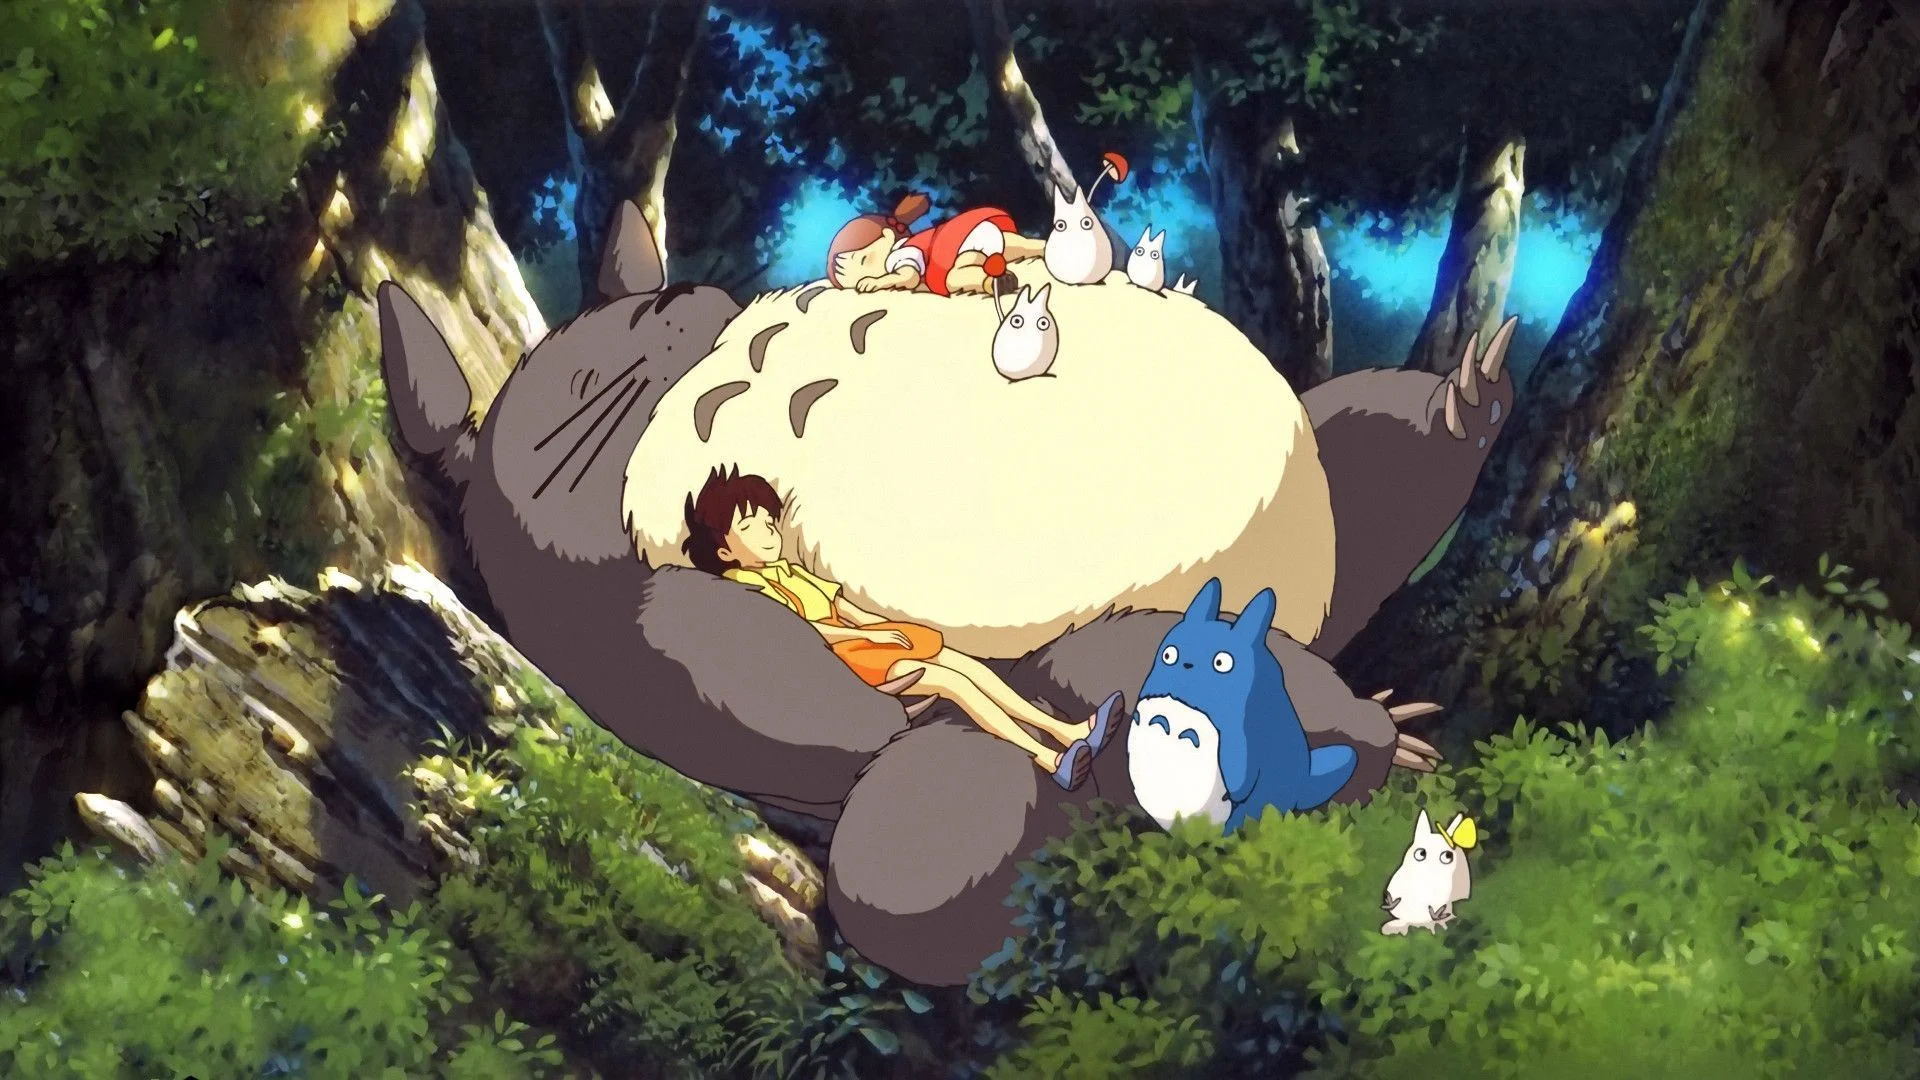 My Neighbor Totoro is a timeless classic that has captured the hearts of audiences for over 30 years. - My Neighbor Totoro